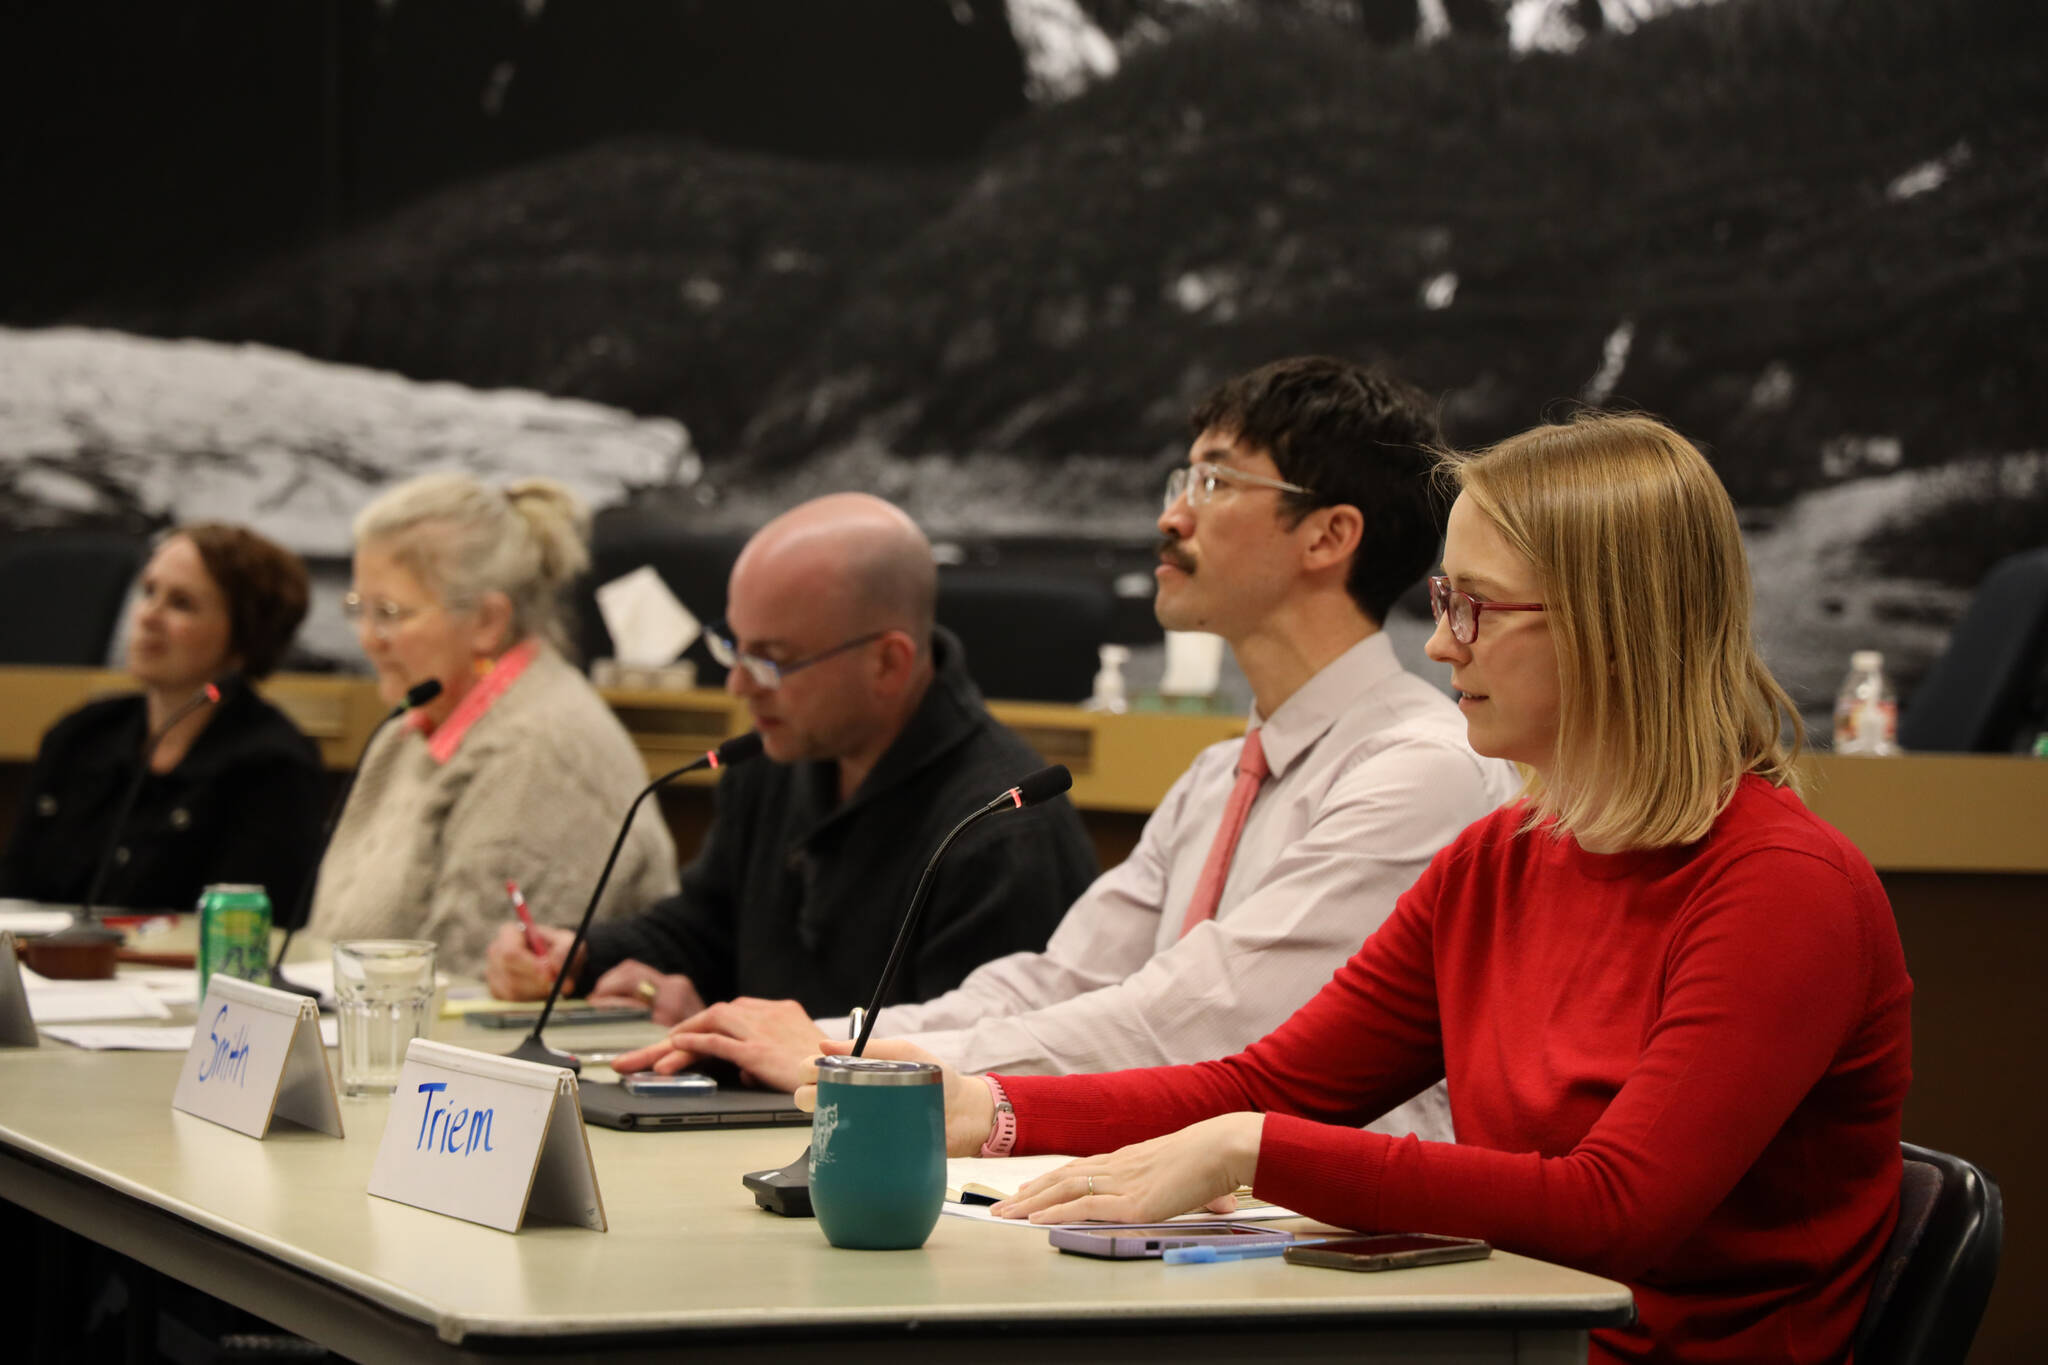 Assembly members listen to a discussion about the near and long-term future of Juneau’s solid waste management during “Talkin’ Trash” work session held by members of the Assembly Public Works and Facilities Committee Thursday afternoon. (Clarise Larson / Juneau Empire)